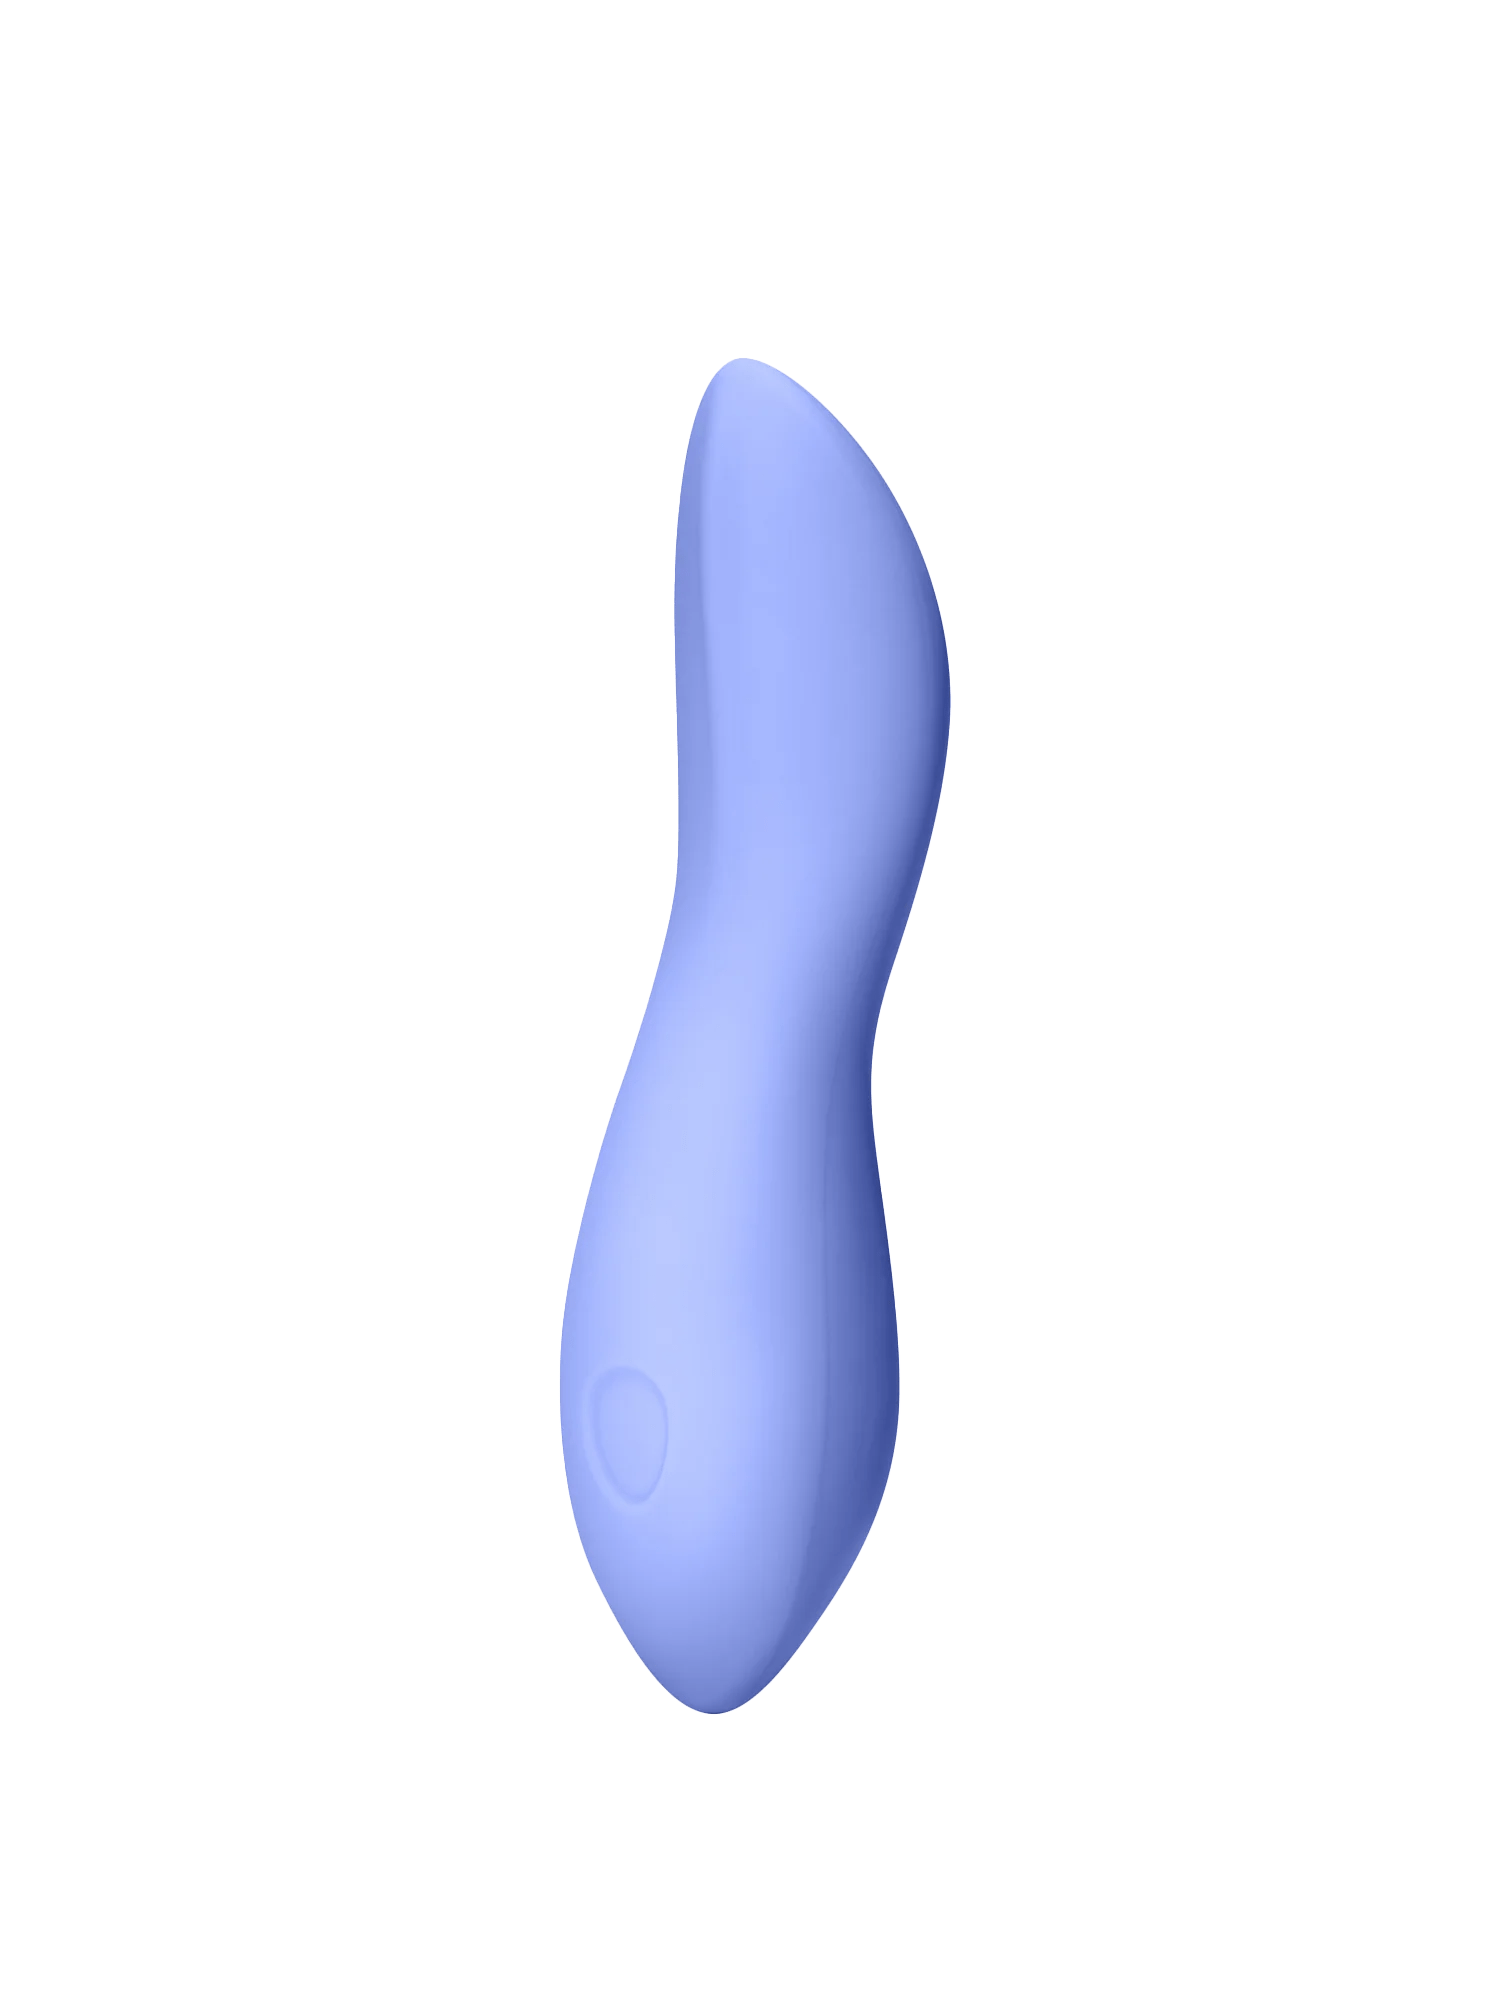 dame dip sex toy, one of the best dame sex toys